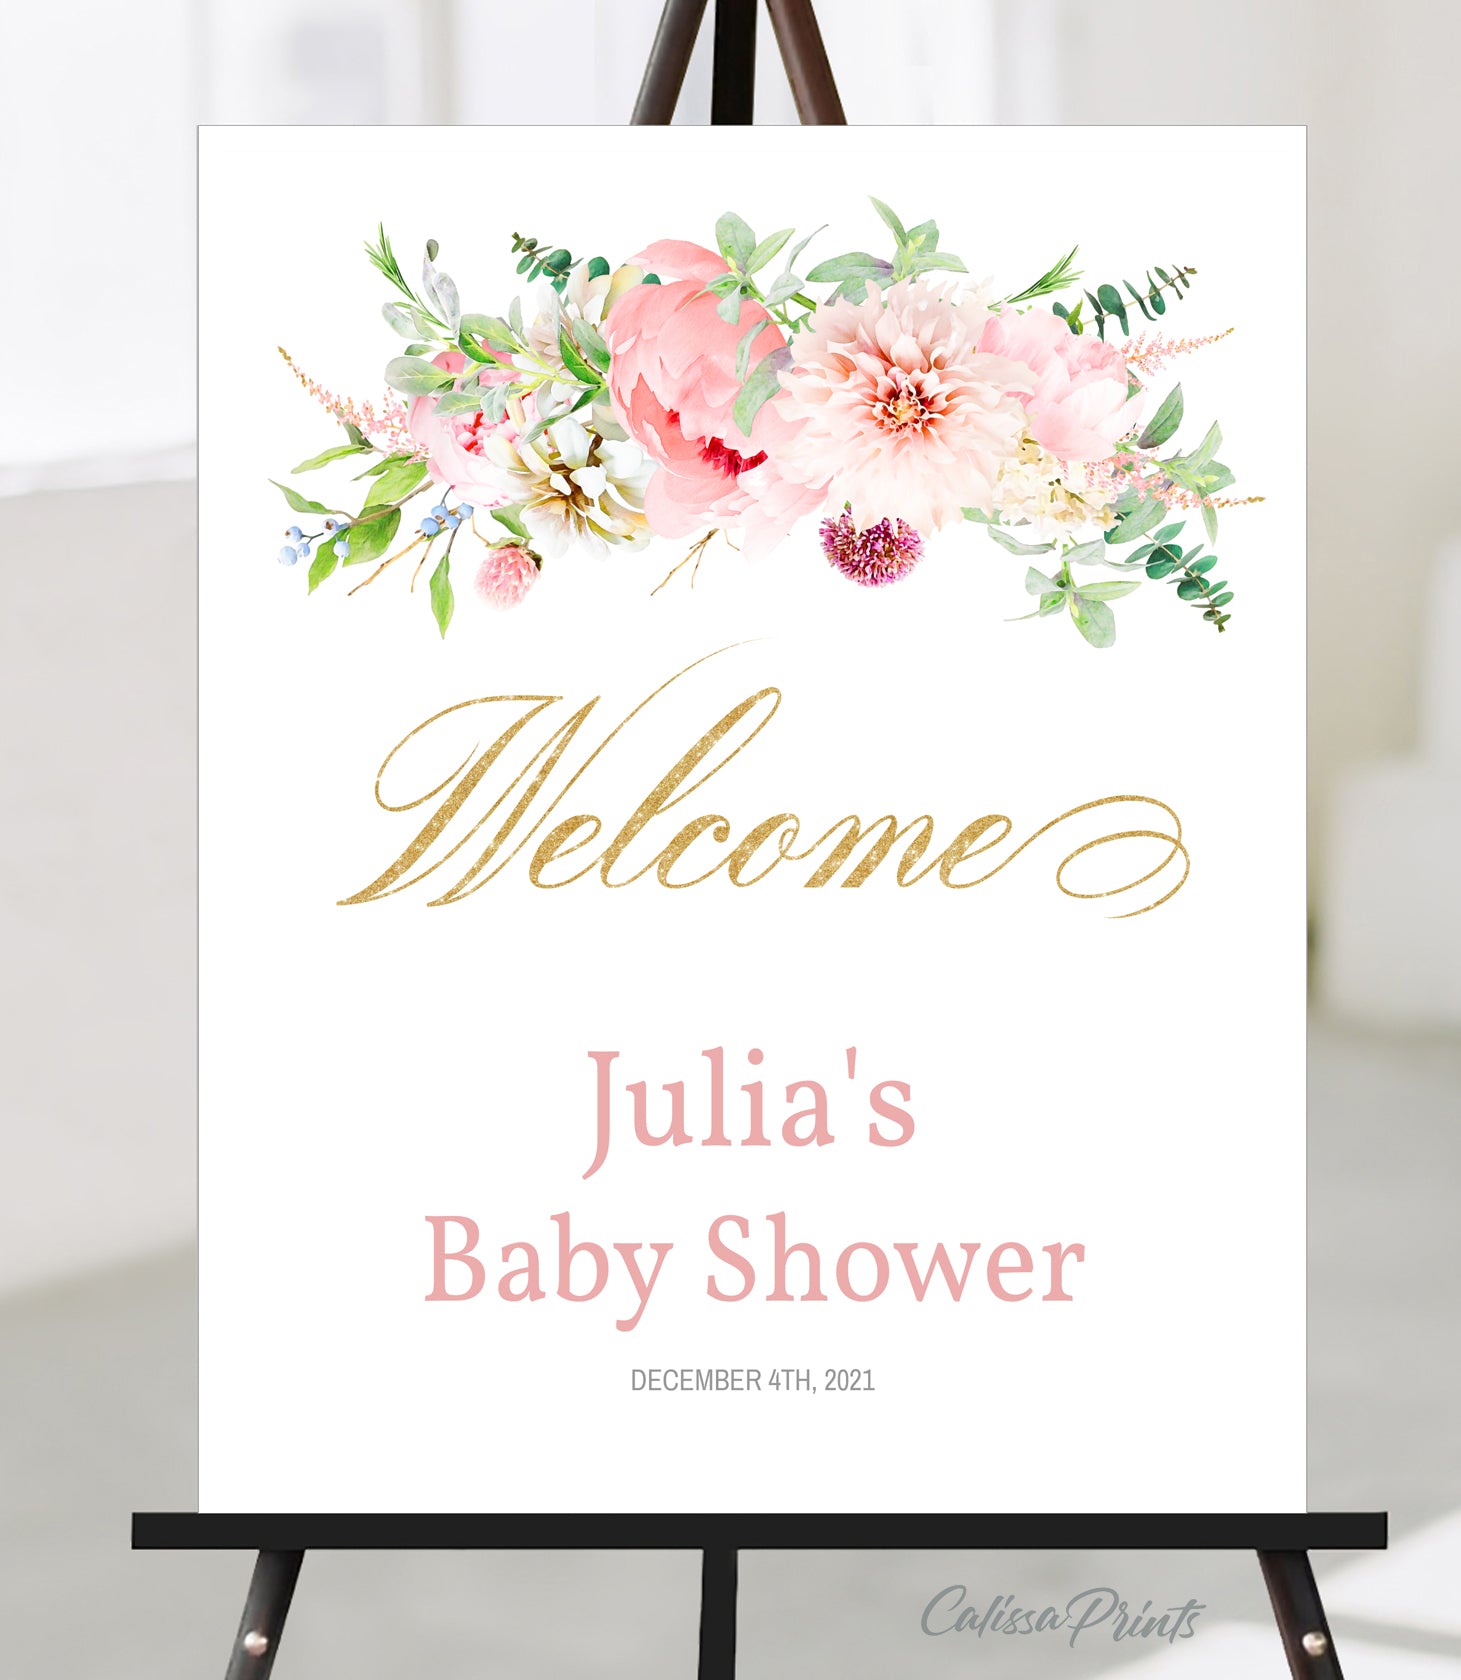 Baby Shower Welcome Signs Templates, Etheral Rose Design - BABY01